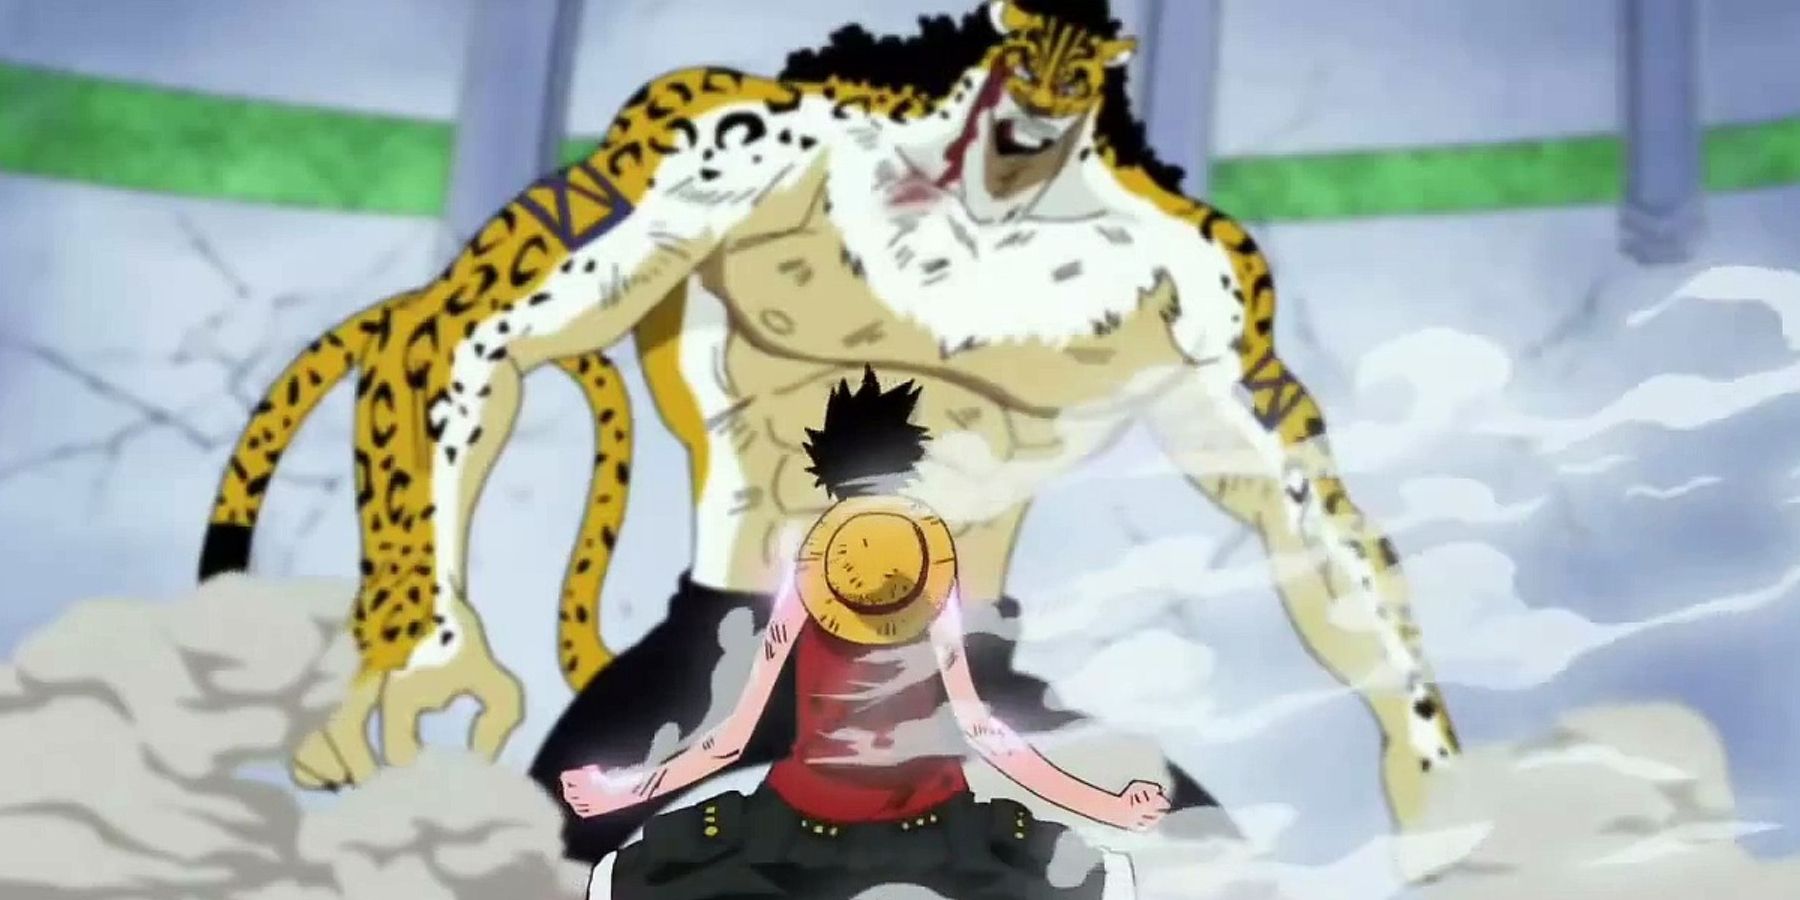 Monkey D. Luffy Uses Gear 2nd Against Rob Lucci One Last Time in One PIece's Enies Lobby Arc